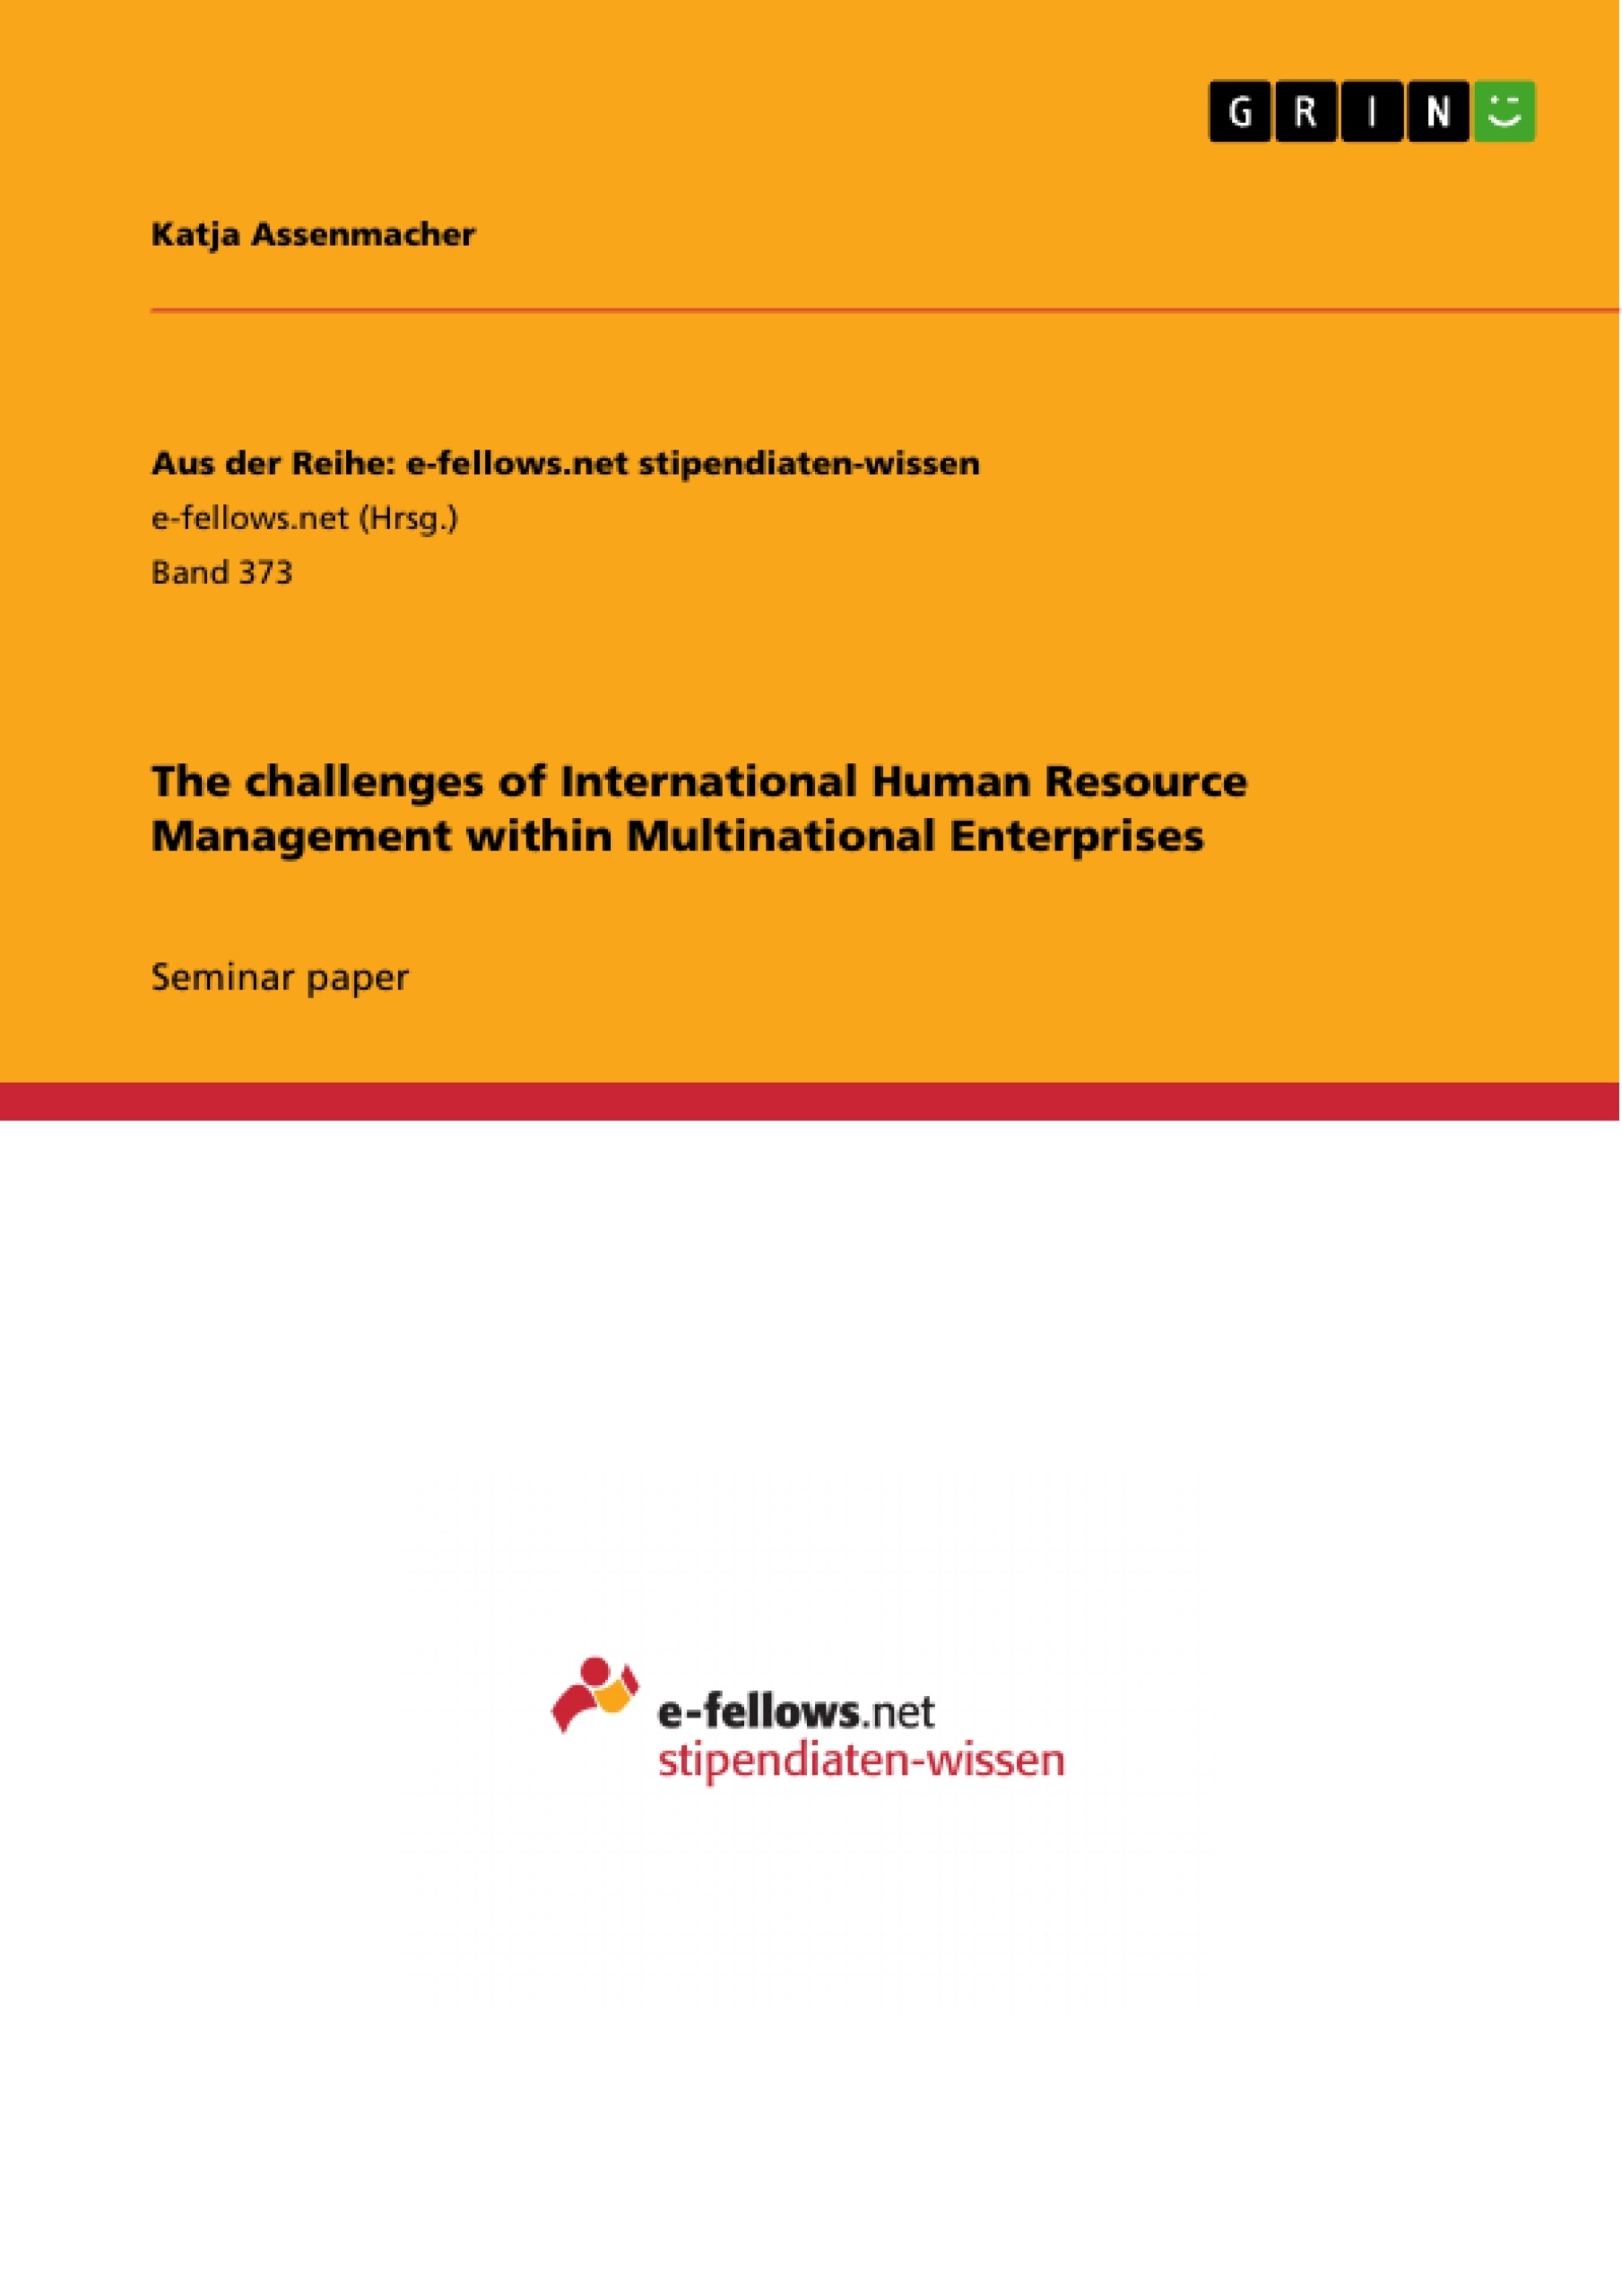 Titre: The challenges of International Human Resource Management within Multinational Enterprises